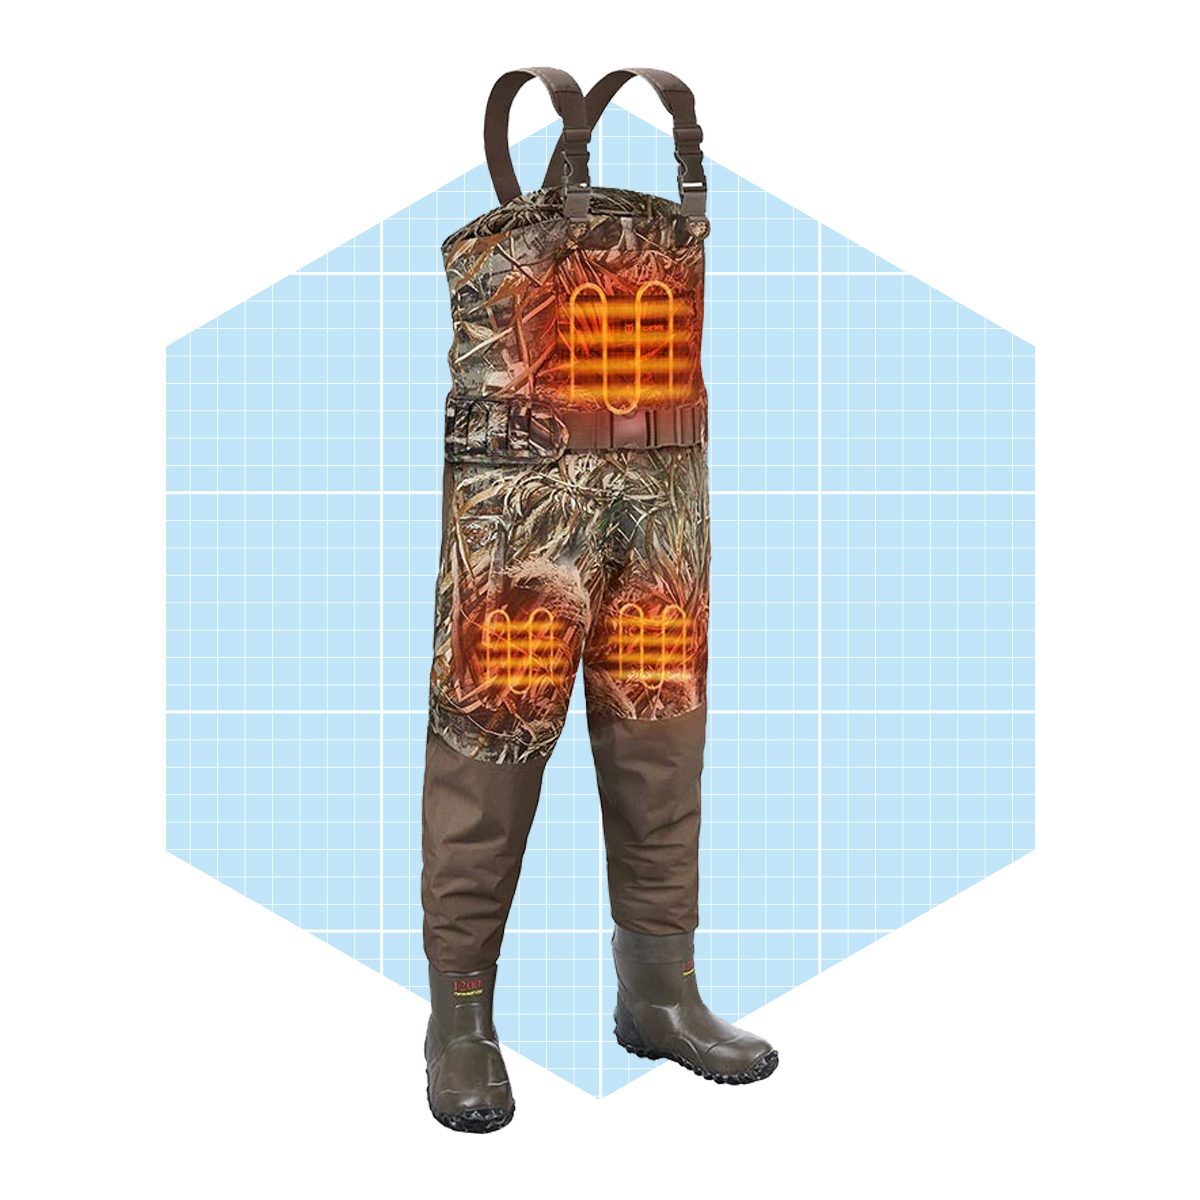 Tidewe Breathable Heated Chest Waders, 1200g Waterproof Duck Hunting Wader With Removable Insulated Liner Ecomm Tidewe.com